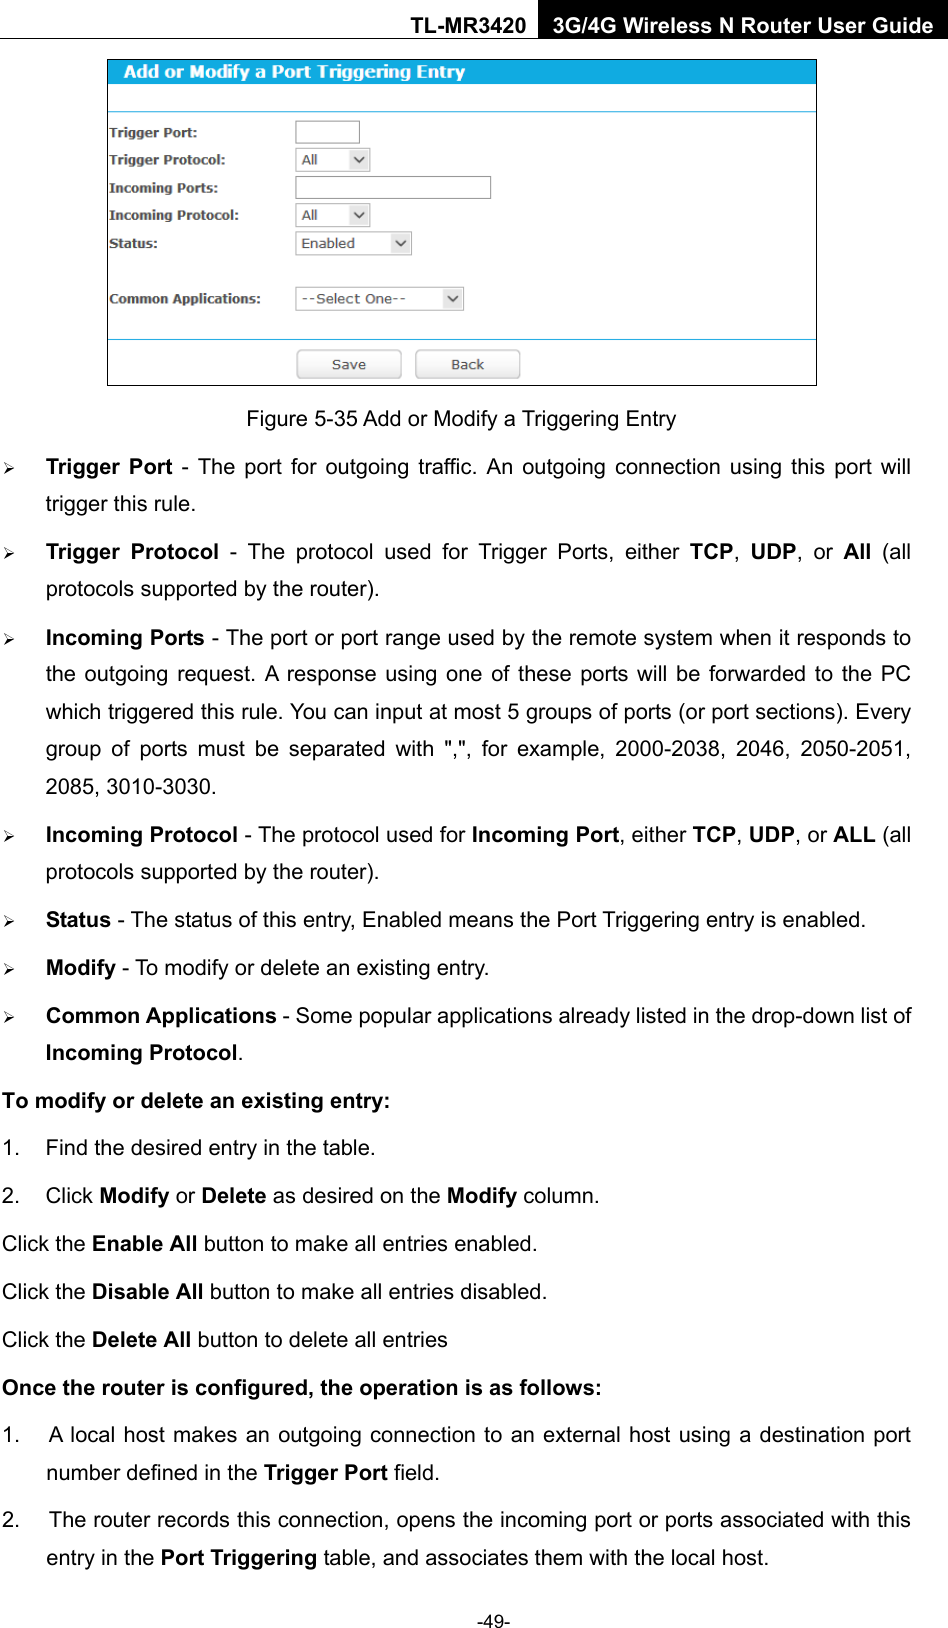    -49- TL-MR3420 3G/4G Wireless N Router User Guide  Figure 5-35 Add or Modify a Triggering Entry  Trigger Port - The port for outgoing traffic. An outgoing connection using this port will trigger this rule.    Trigger Protocol - The protocol used for Trigger Ports, either TCP,  UDP, or All  (all protocols supported by the router).    Incoming Ports - The port or port range used by the remote system when it responds to the outgoing request. A response using one of these ports will be forwarded to the PC which triggered this rule. You can input at most 5 groups of ports (or port sections). Every group of ports must be separated with &quot;,&quot;, for example, 2000-2038, 2046, 2050-2051, 2085, 3010-3030.    Incoming Protocol - The protocol used for Incoming Port, either TCP, UDP, or ALL (all protocols supported by the router).    Status - The status of this entry, Enabled means the Port Triggering entry is enabled.    Modify - To modify or delete an existing entry.    Common Applications - Some popular applications already listed in the drop-down list of Incoming Protocol. To modify or delete an existing entry: 1. Find the desired entry in the table.   2. Click Modify or Delete as desired on the Modify column.   Click the Enable All button to make all entries enabled. Click the Disable All button to make all entries disabled. Click the Delete All button to delete all entries Once the router is configured, the operation is as follows: 1. A local host makes an outgoing connection to an external host using a destination port number defined in the Trigger Port field.   2. The router records this connection, opens the incoming port or ports associated with this entry in the Port Triggering table, and associates them with the local host.   